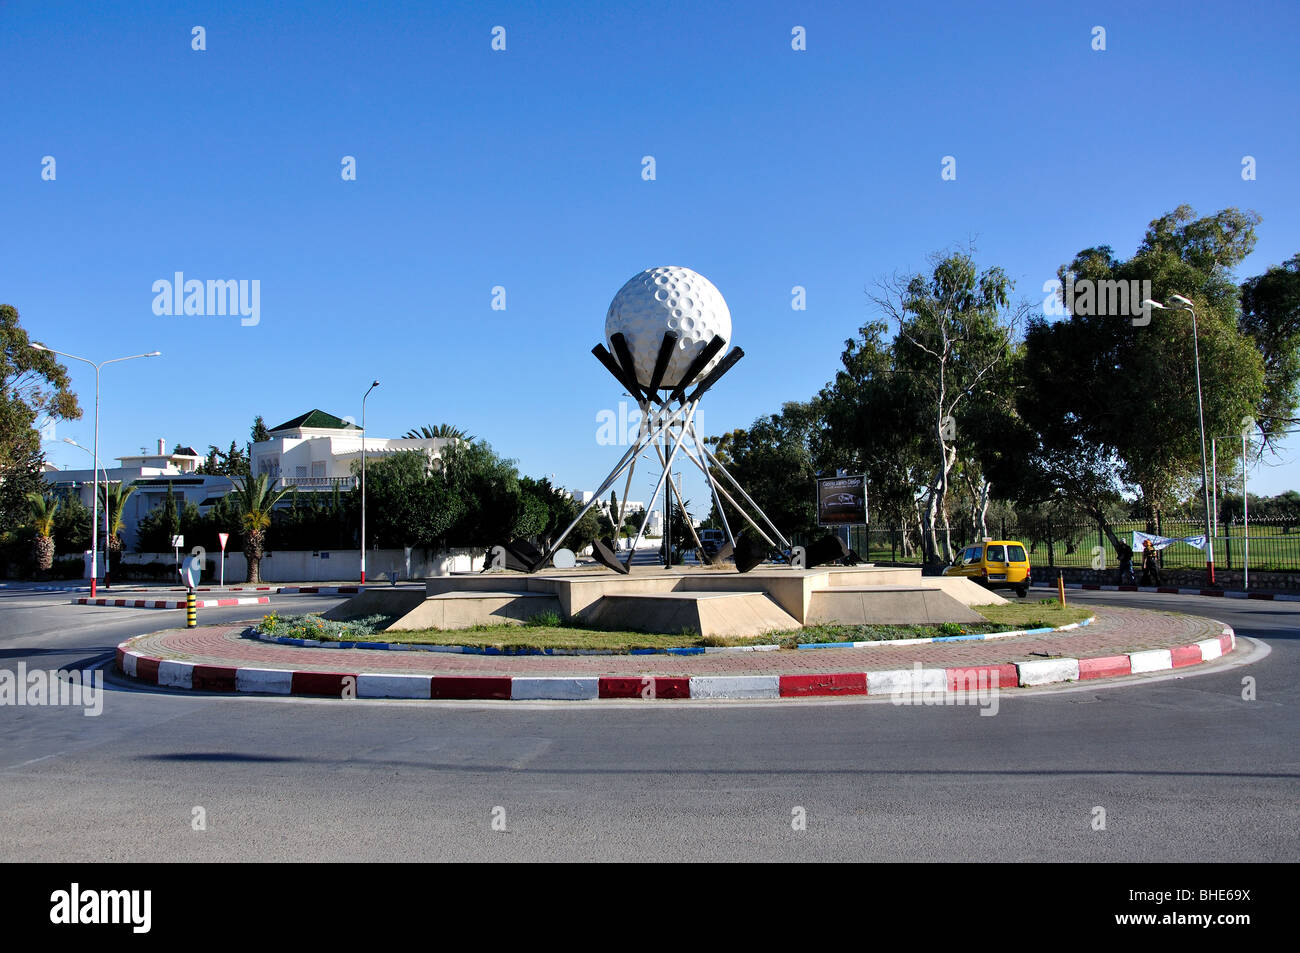 El Kantaoui Golf Course roundabout with golf ball and clubs, Port El Kantaoui, Sousse Governorate, Tunisia Stock Photo